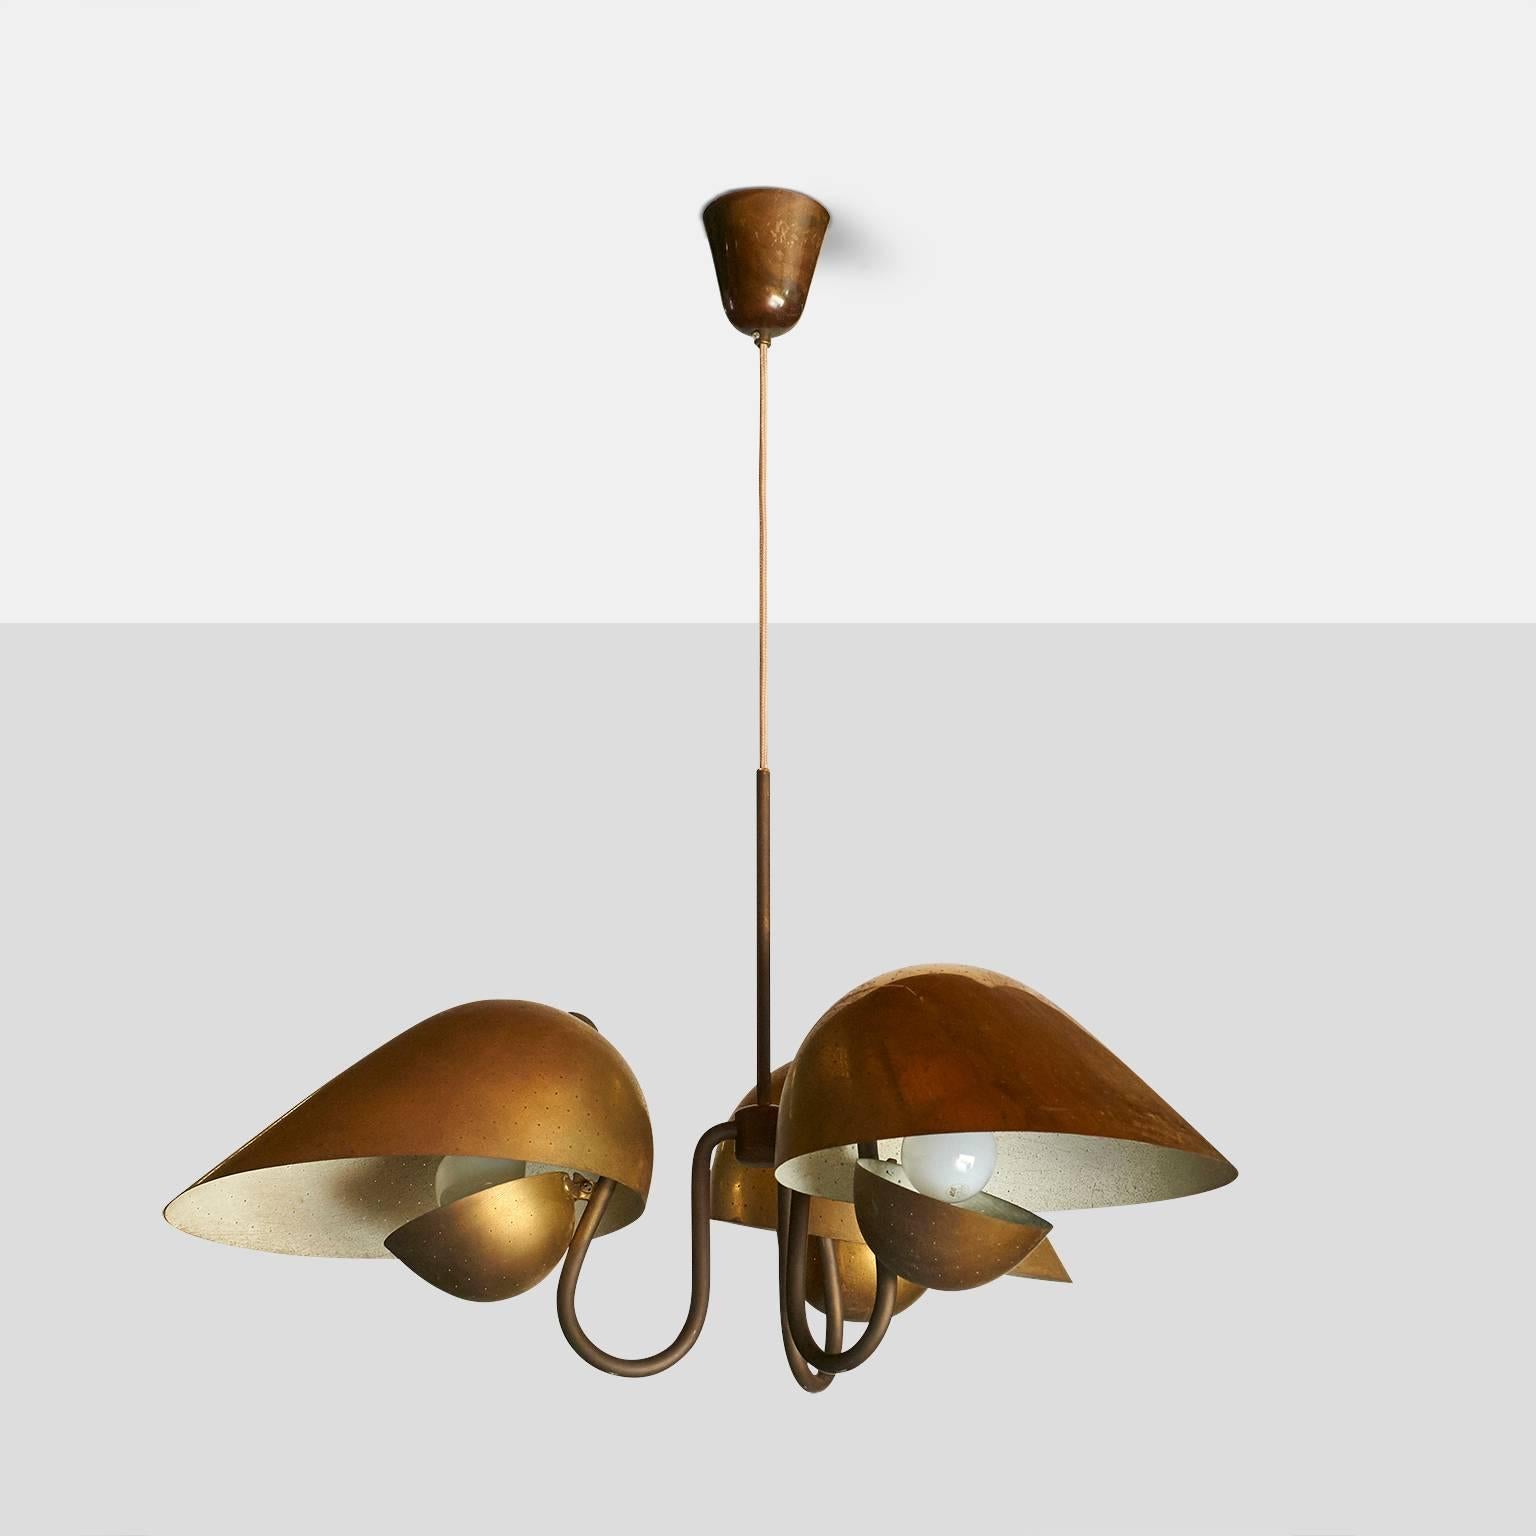 A 1940s chandelier in natural patinated brass, by Carl-Axel Acking for Bro¨derna Malmstro¨ms Metallvarufabrik. Each S-curved arm holds a curved shade with pinholes and a smaller diffuser underneath. Can be adjusted to any overall length